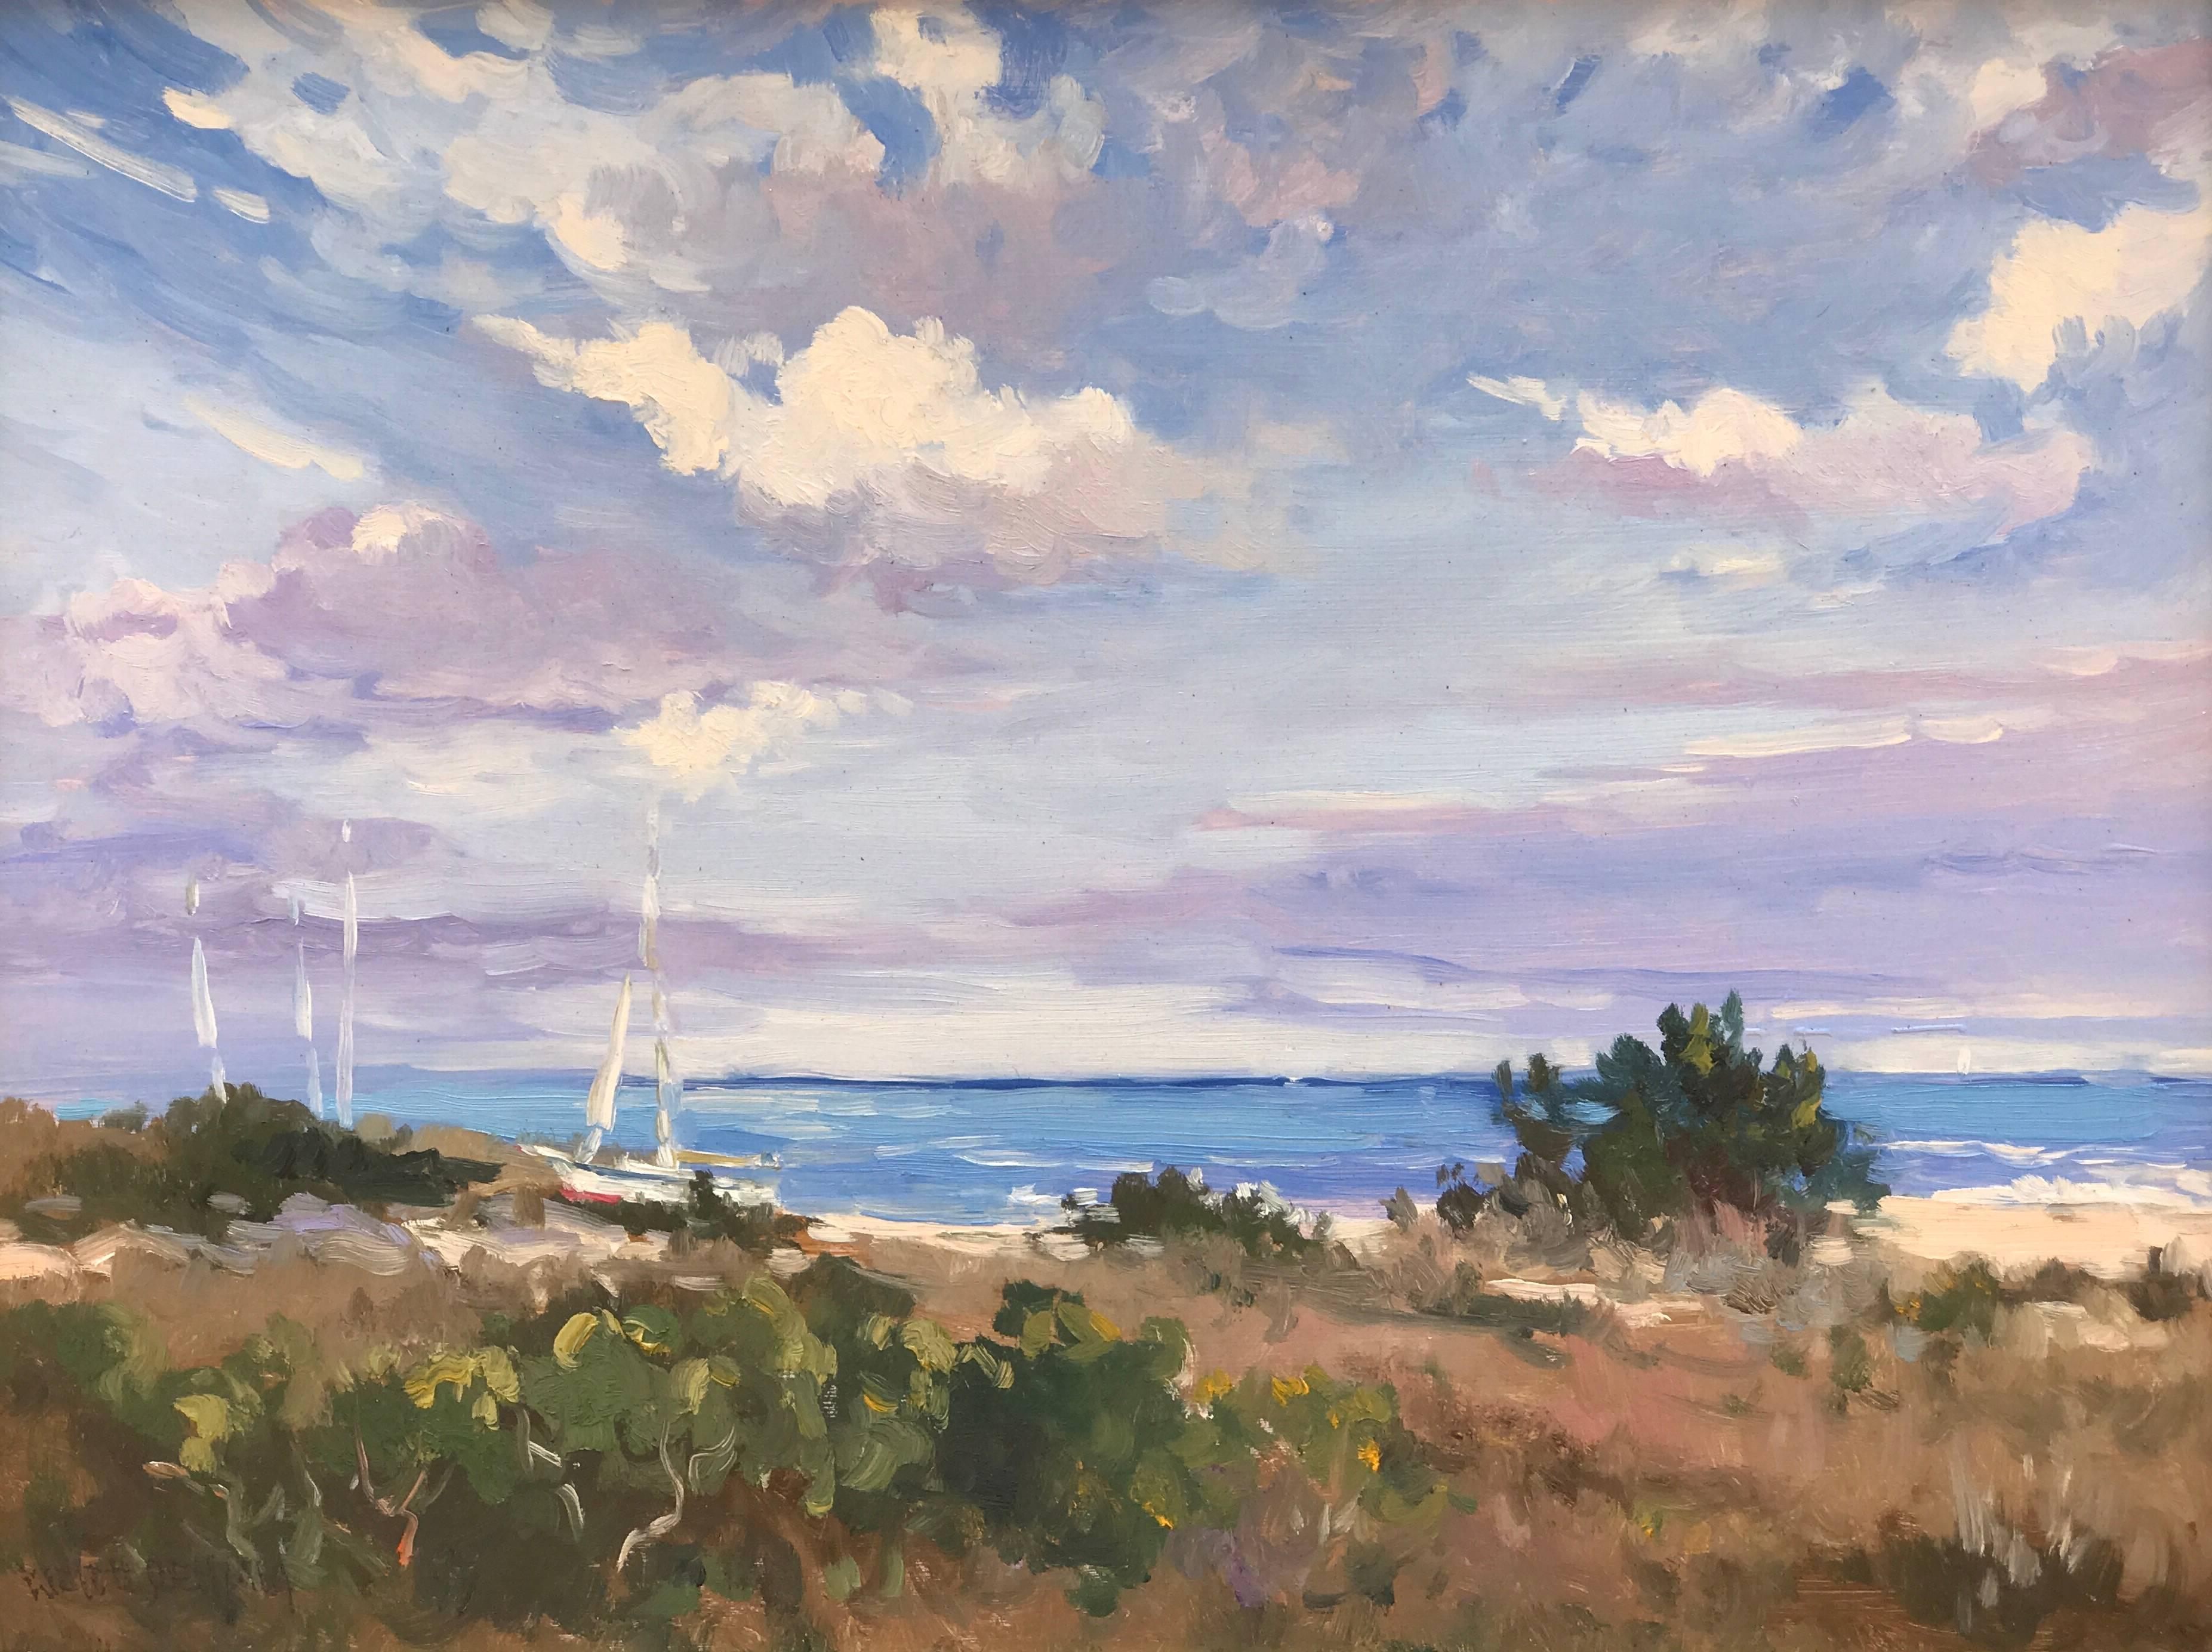 Keith Oehmig Landscape Painting - "Summertime"